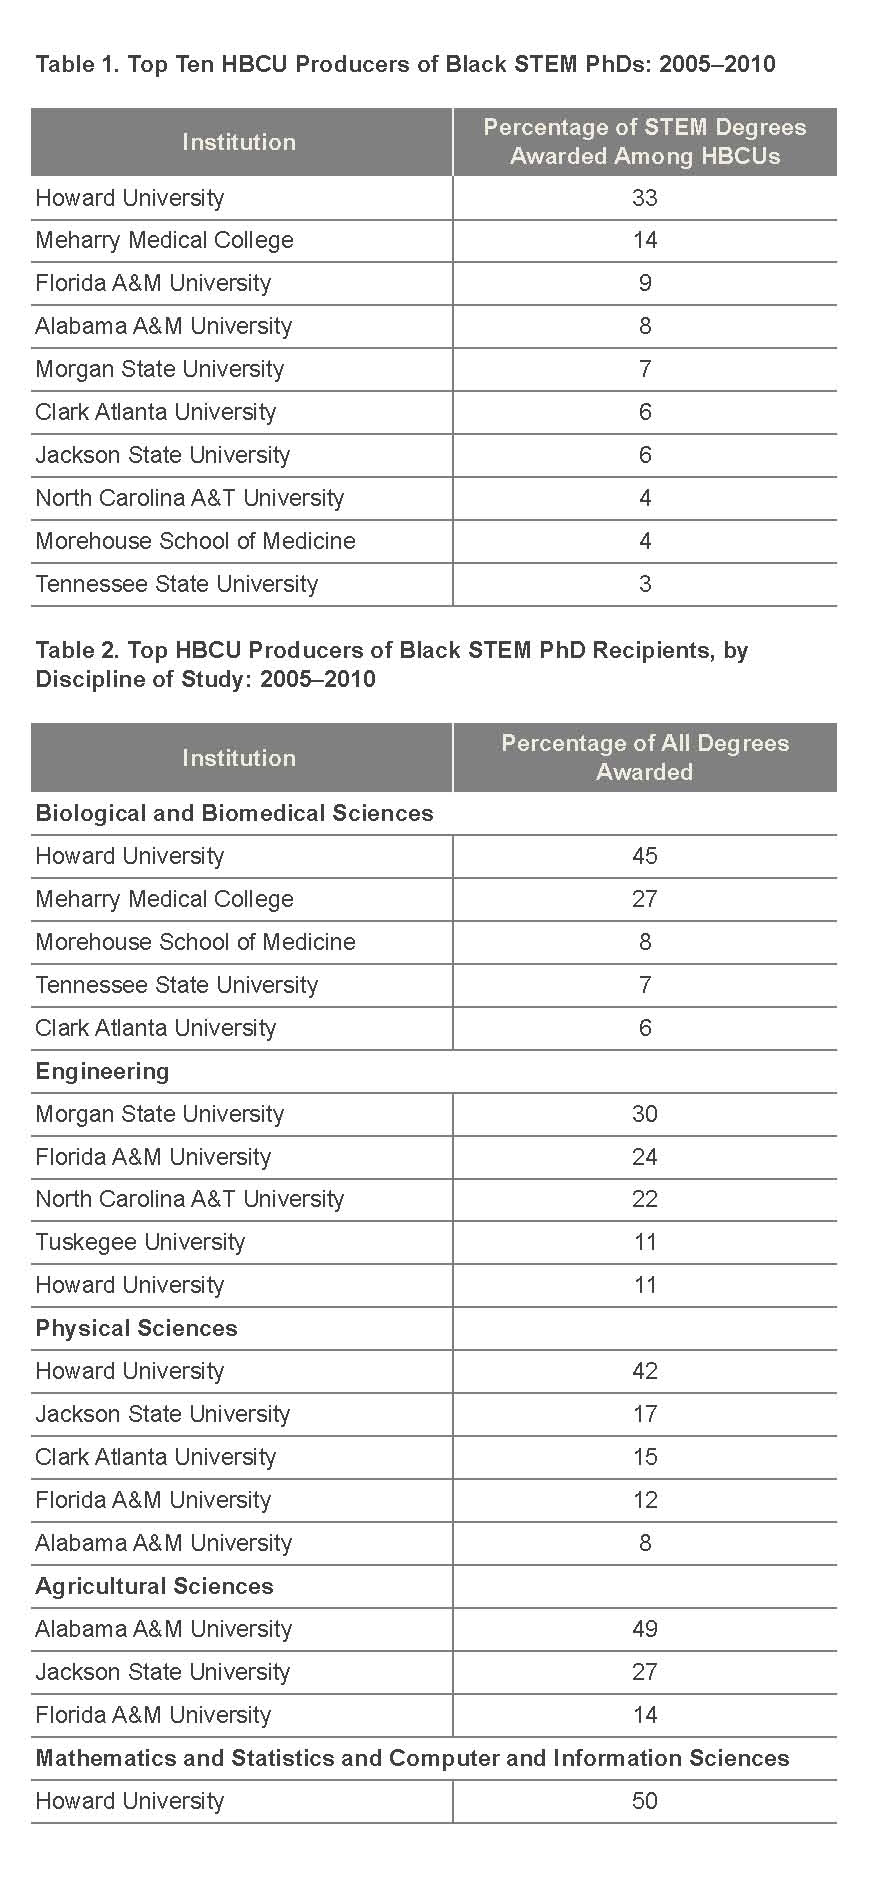 Tables showing HBCU producers of black STEM PhDs